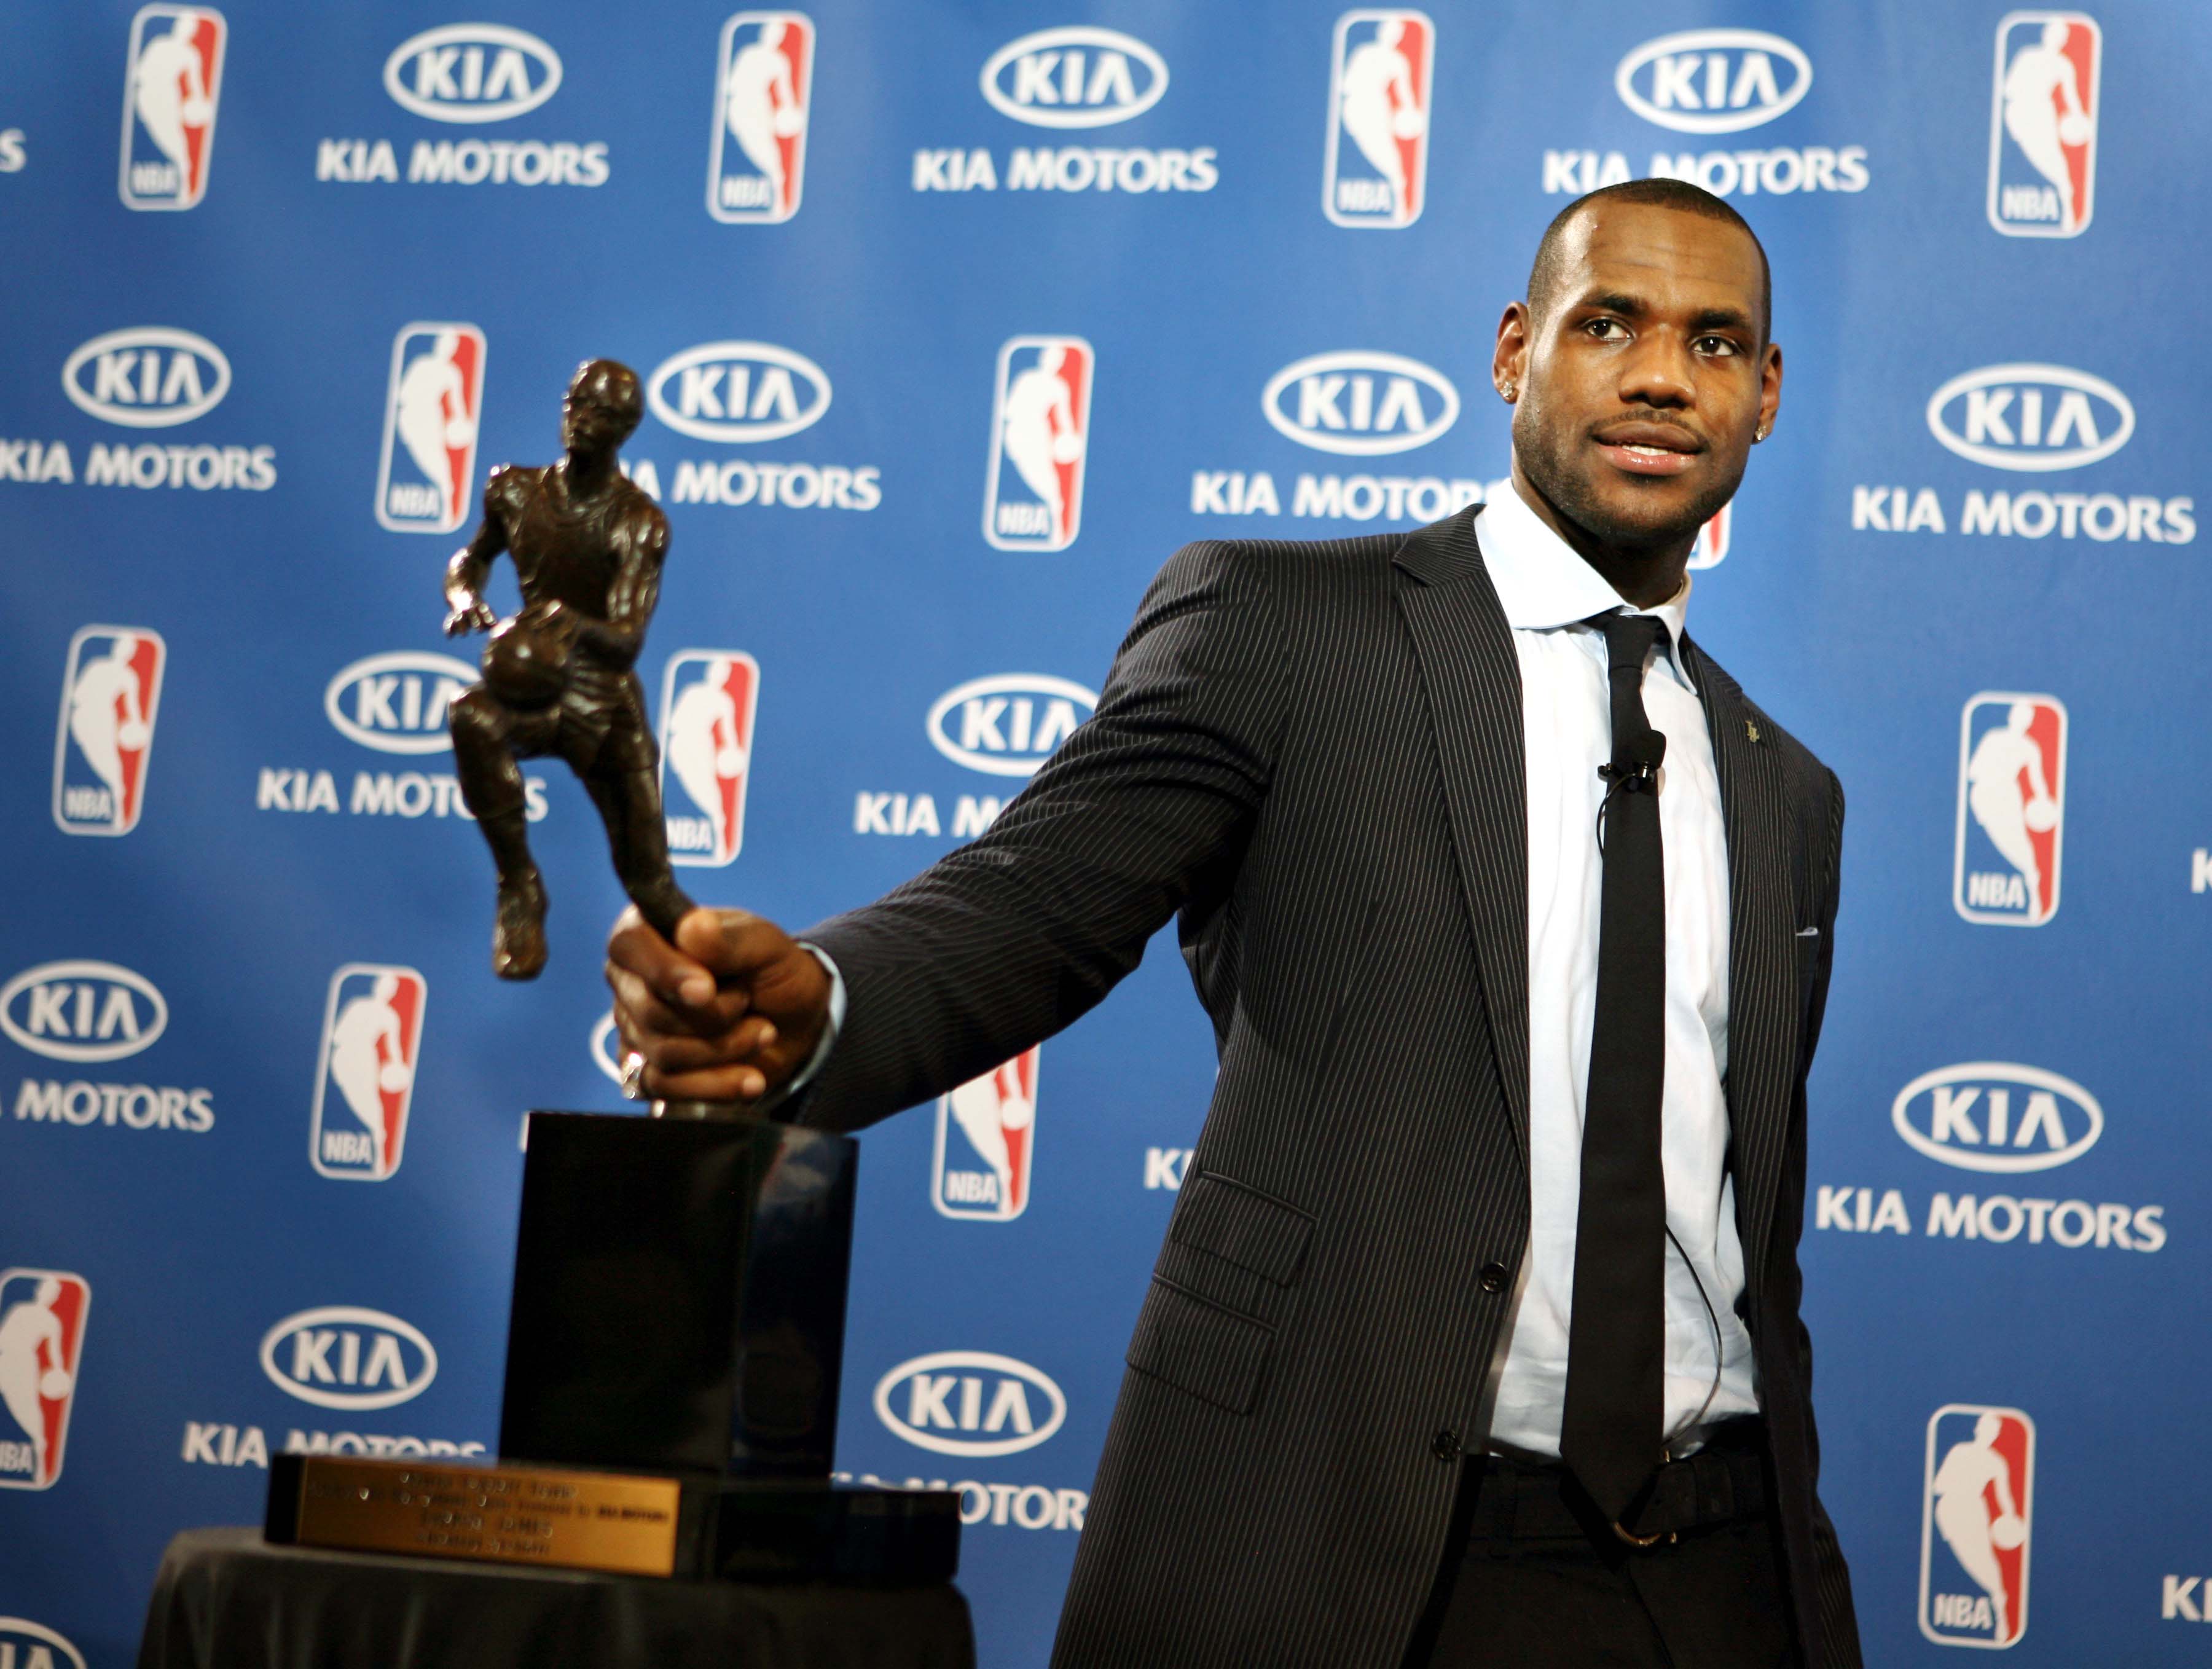 LeBron James holds the NBA Most Valuable Player trophy after being named the leagues outstanding player Monday, May 4, 2009.  James held the trophy presentation at his former high school, St. Vincent-St. Mary High School in Akron.  (Gus Chan / The Plain Dealer) 